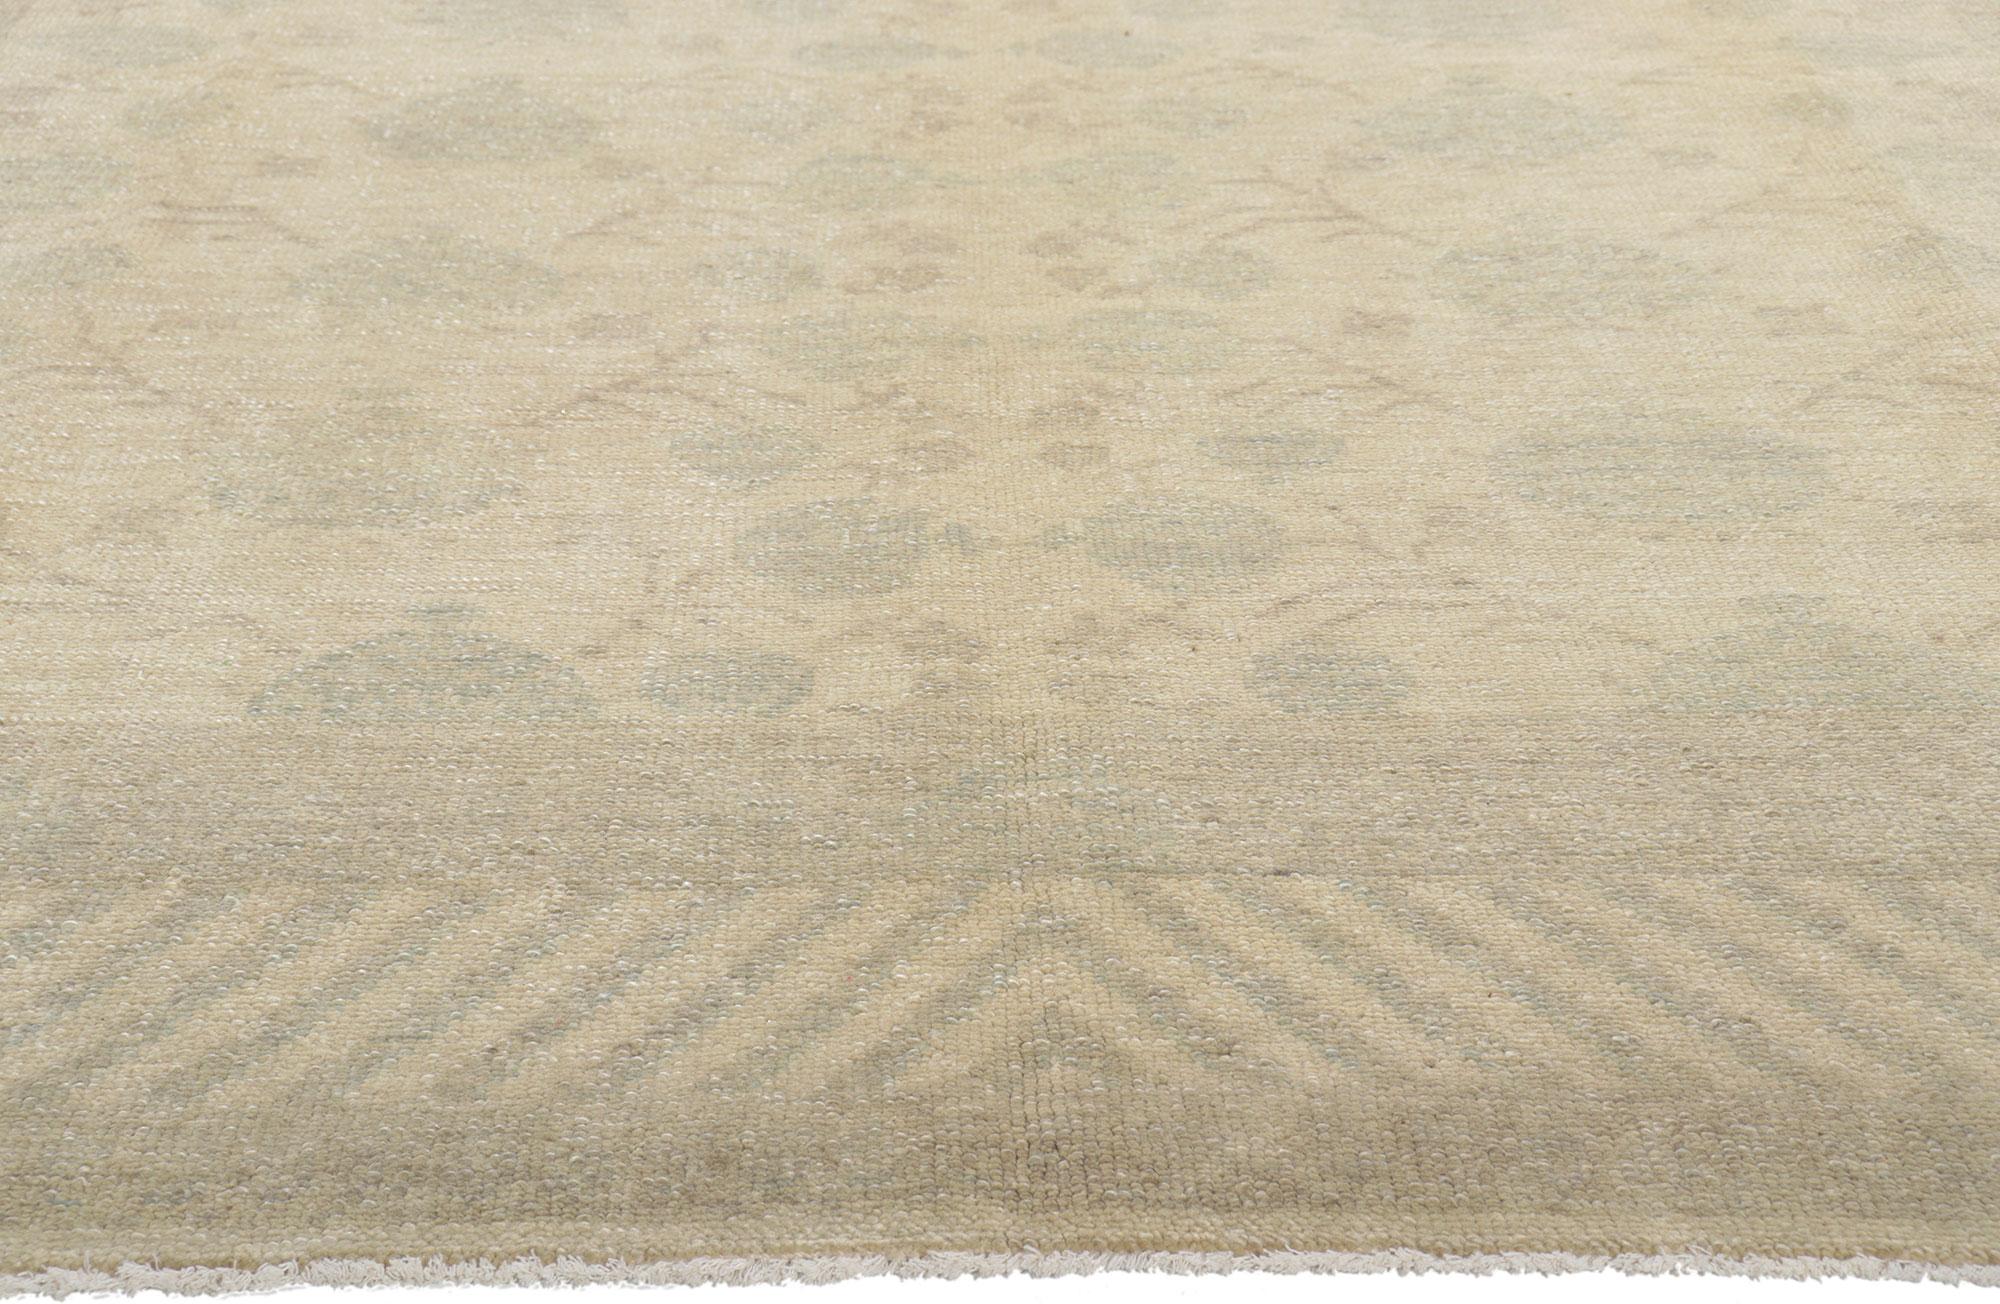 Indian New Transitional Khotan Rug with Soft Earth-Tone Colors For Sale